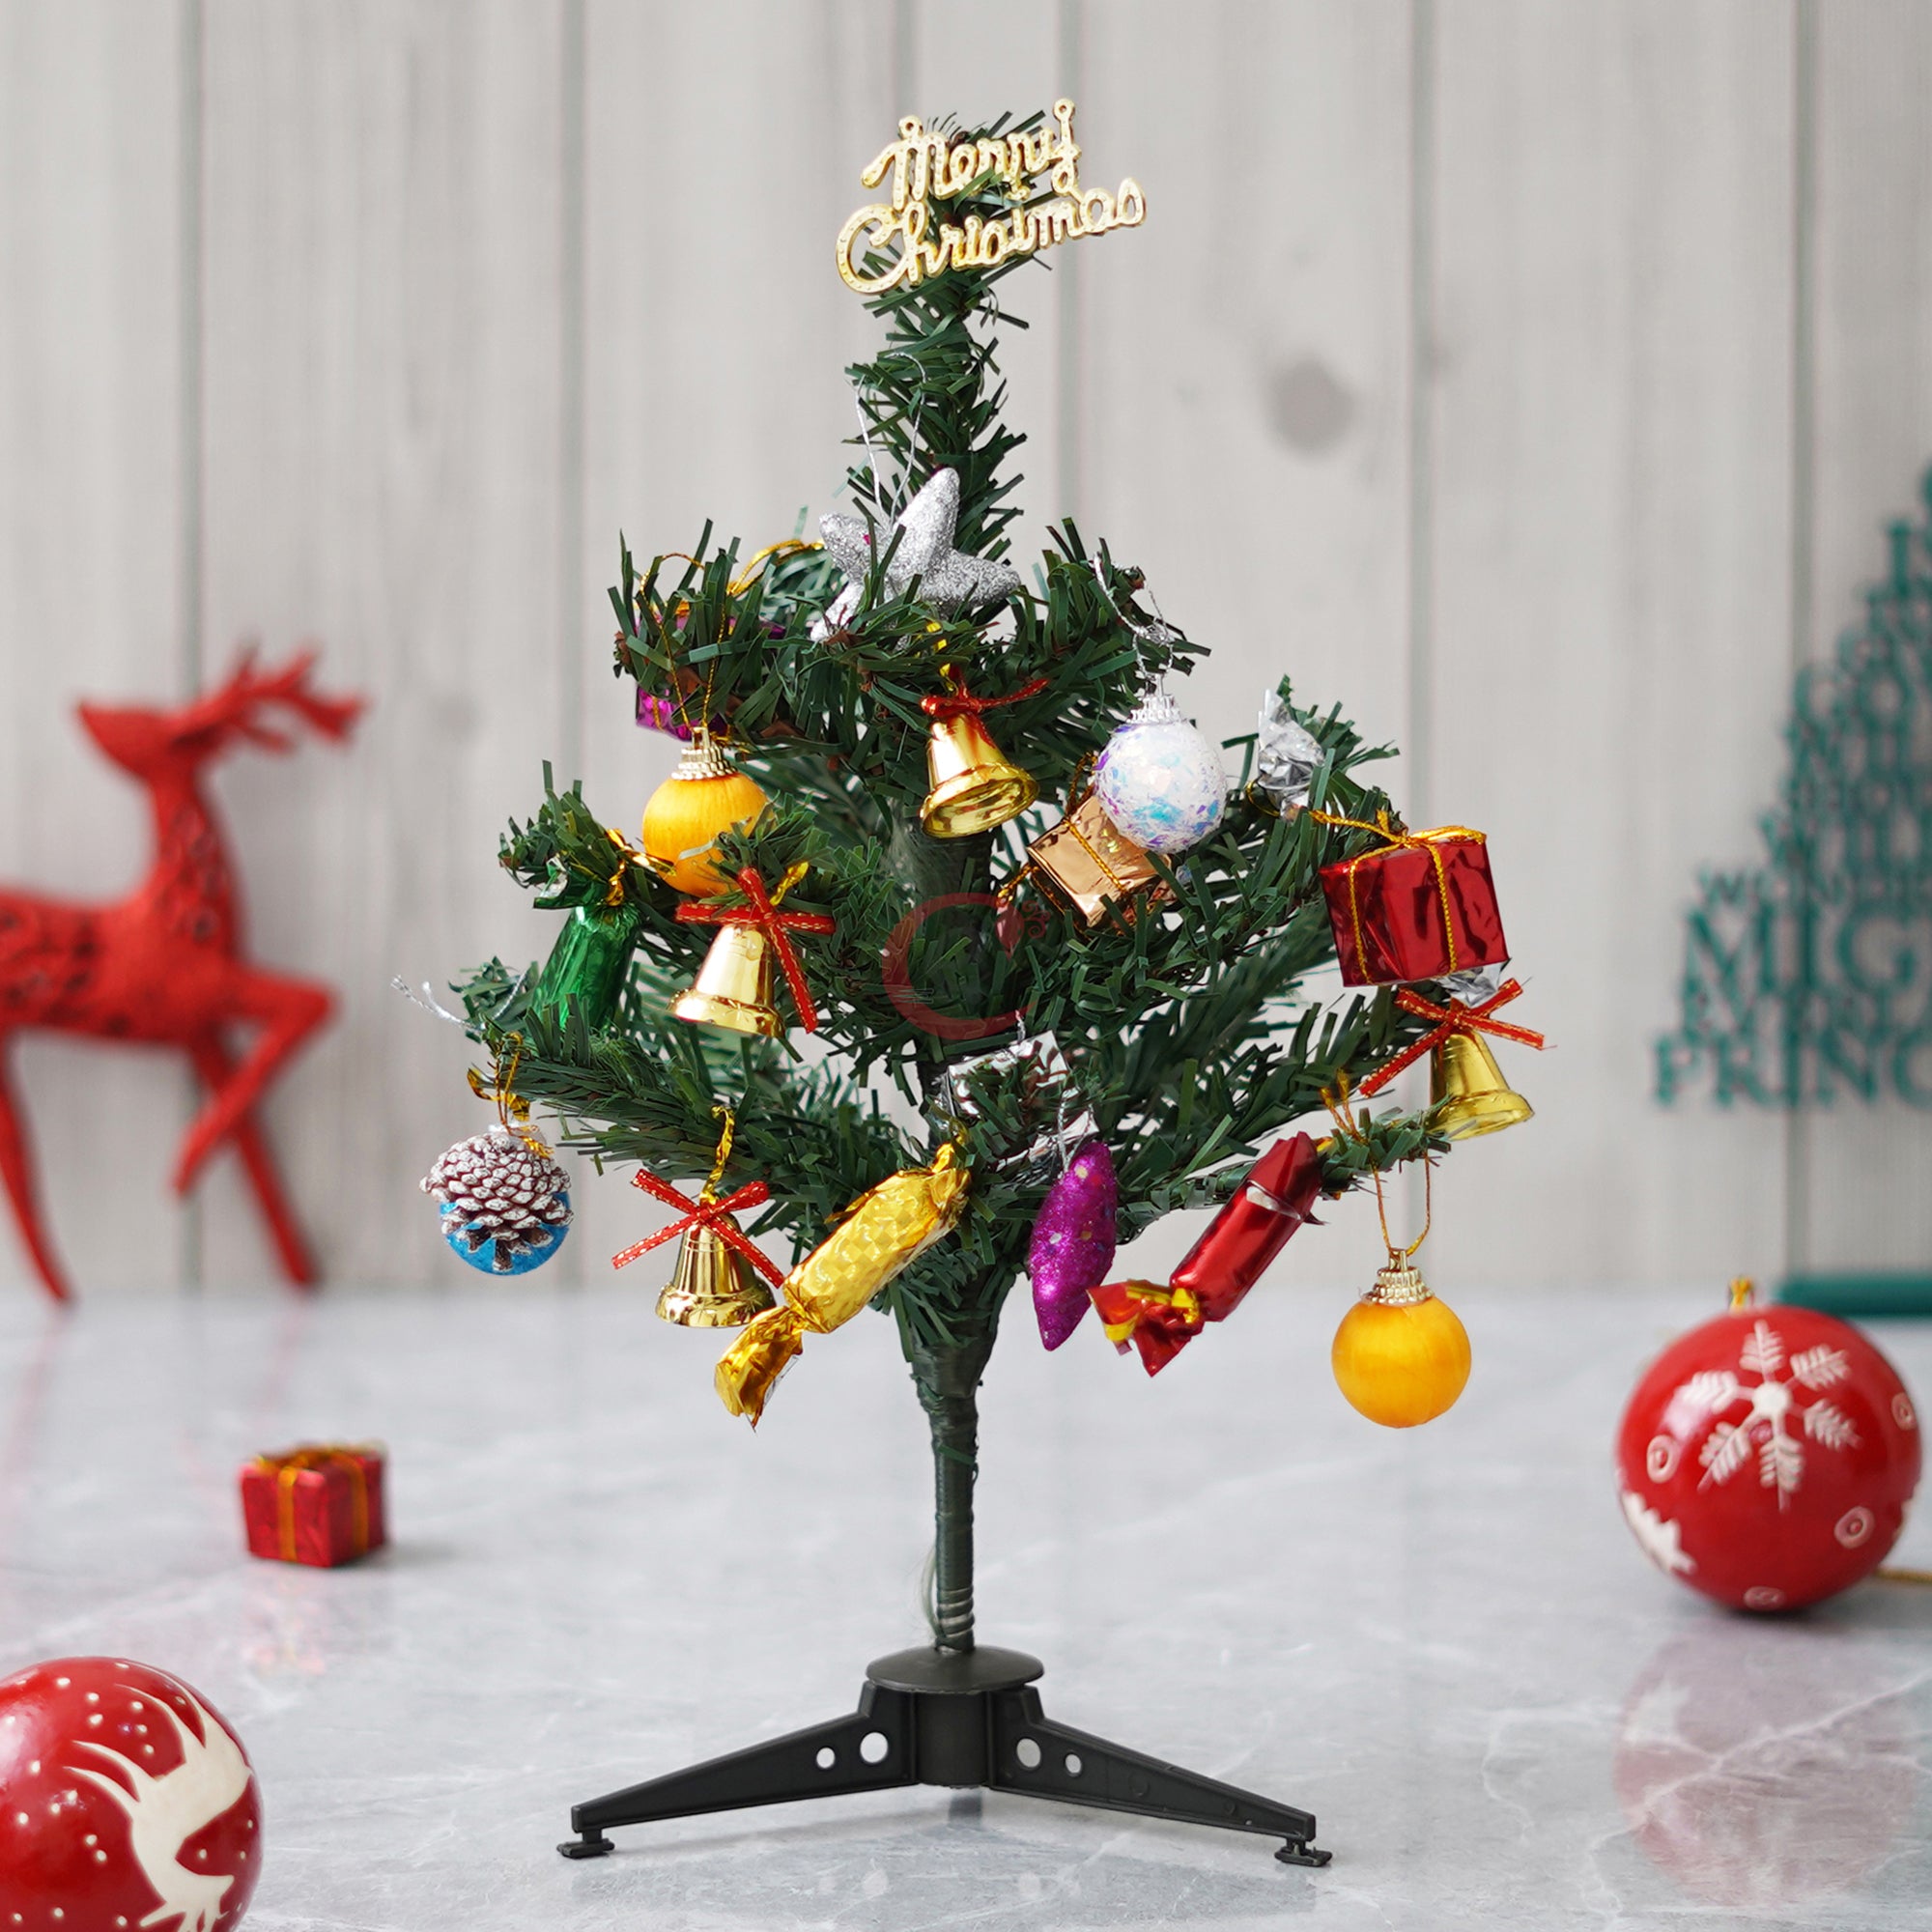 eCraftIndia 1 Feet Green Artificial Christmas Tree Xmas Pine Tree with Stand and 40 Christmas Decoration Ornaments Props - Merry Christmas Decoration Item for Home, Office, and Church